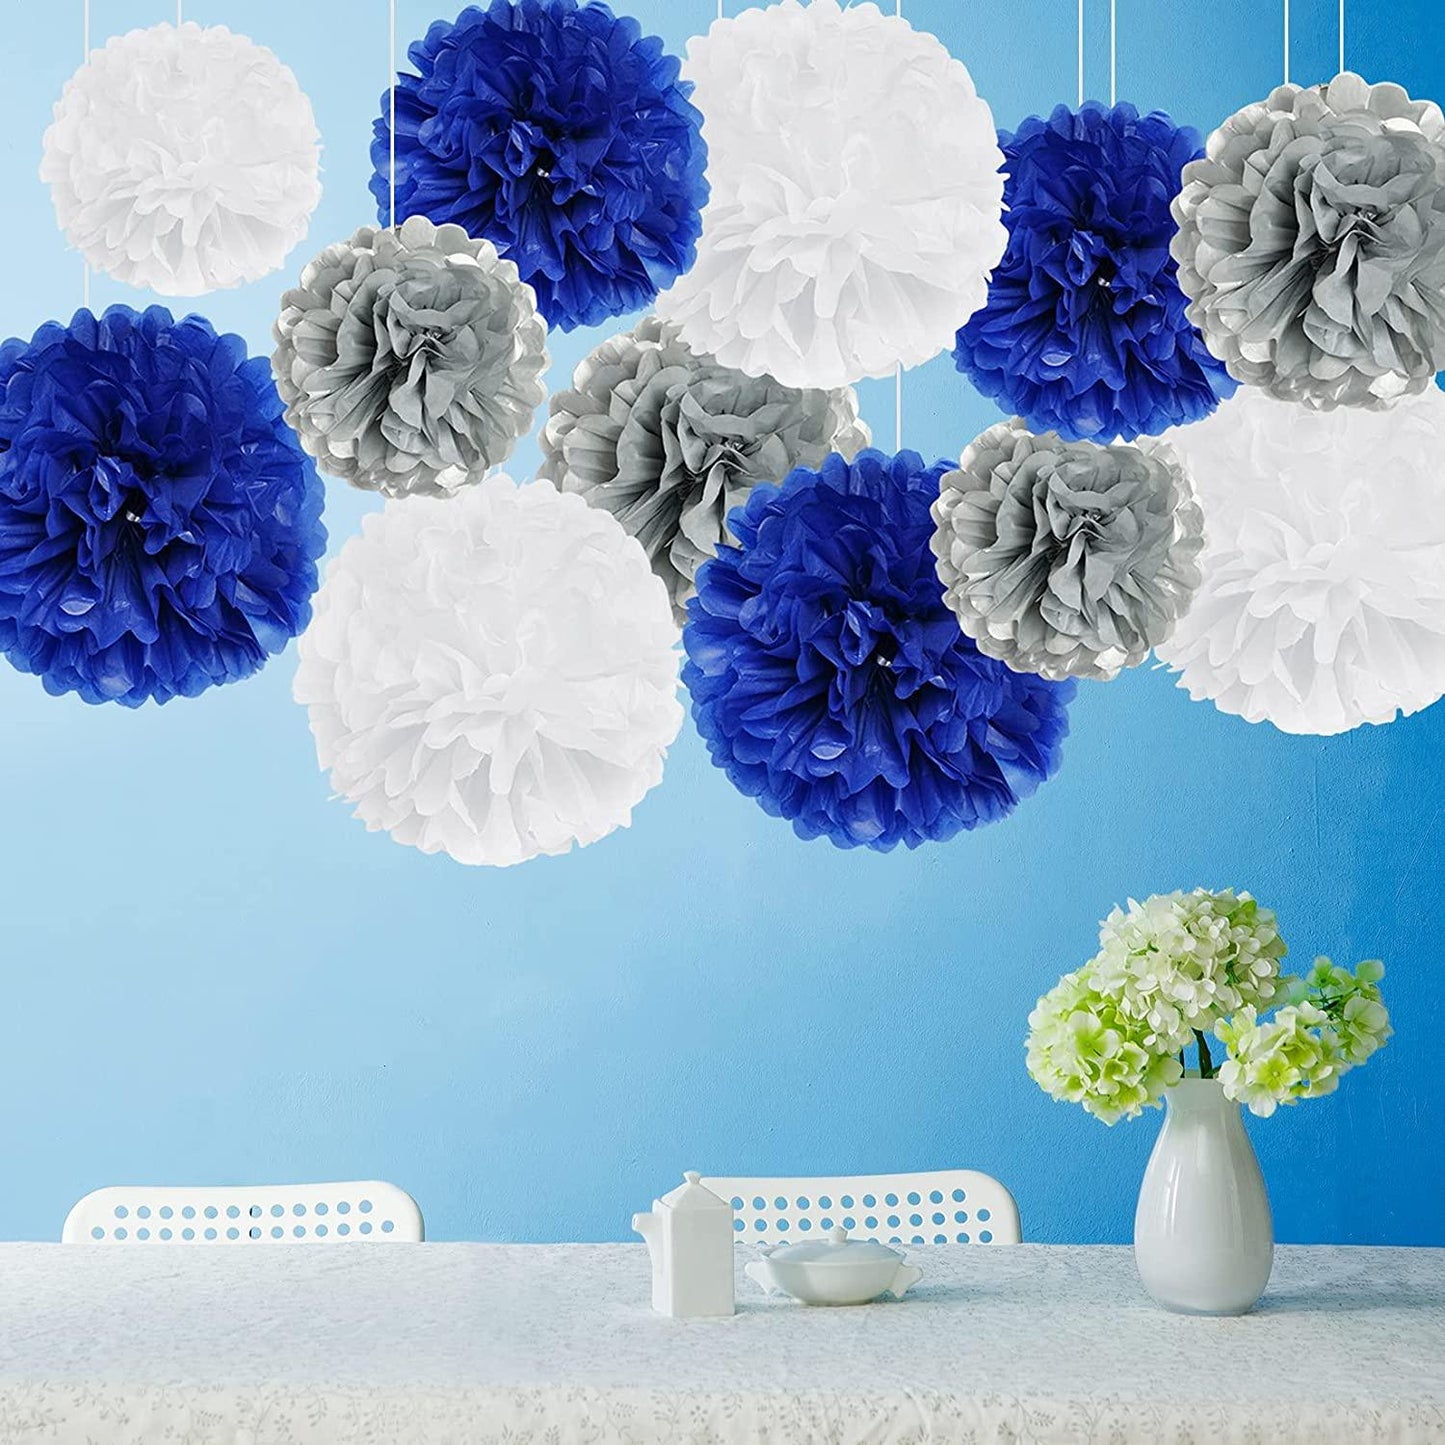 18PCS Royal Blue Tissue Paper Pom Poms Navy Party Decorations - If you say i do